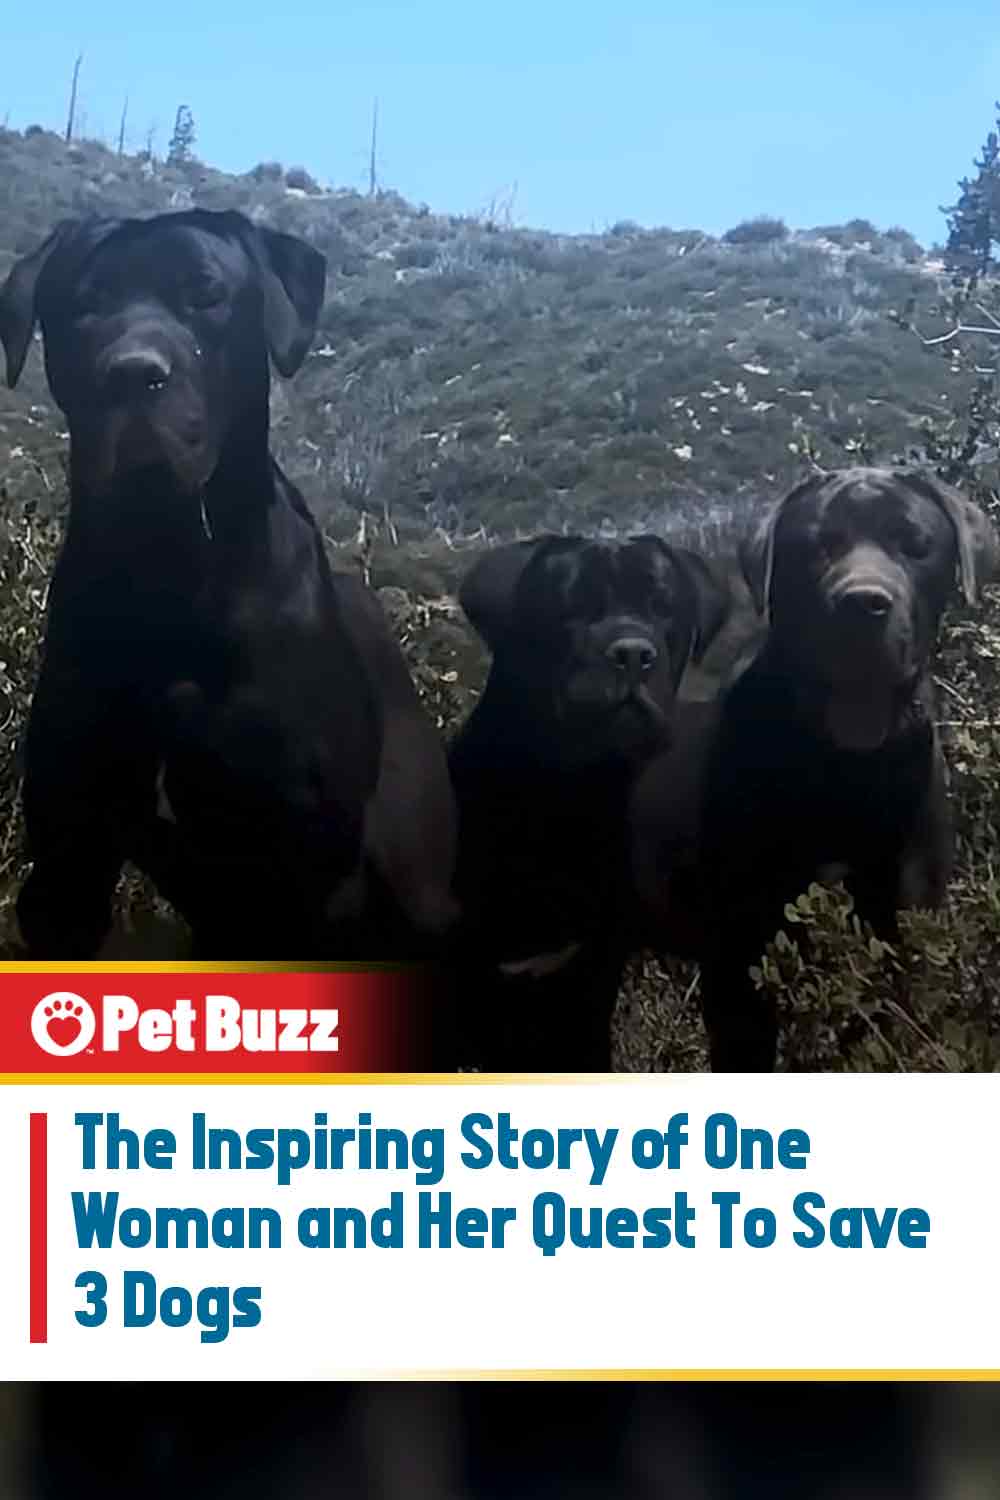 The Inspiring Story of One Woman and Her Quest To Save 3 Dogs